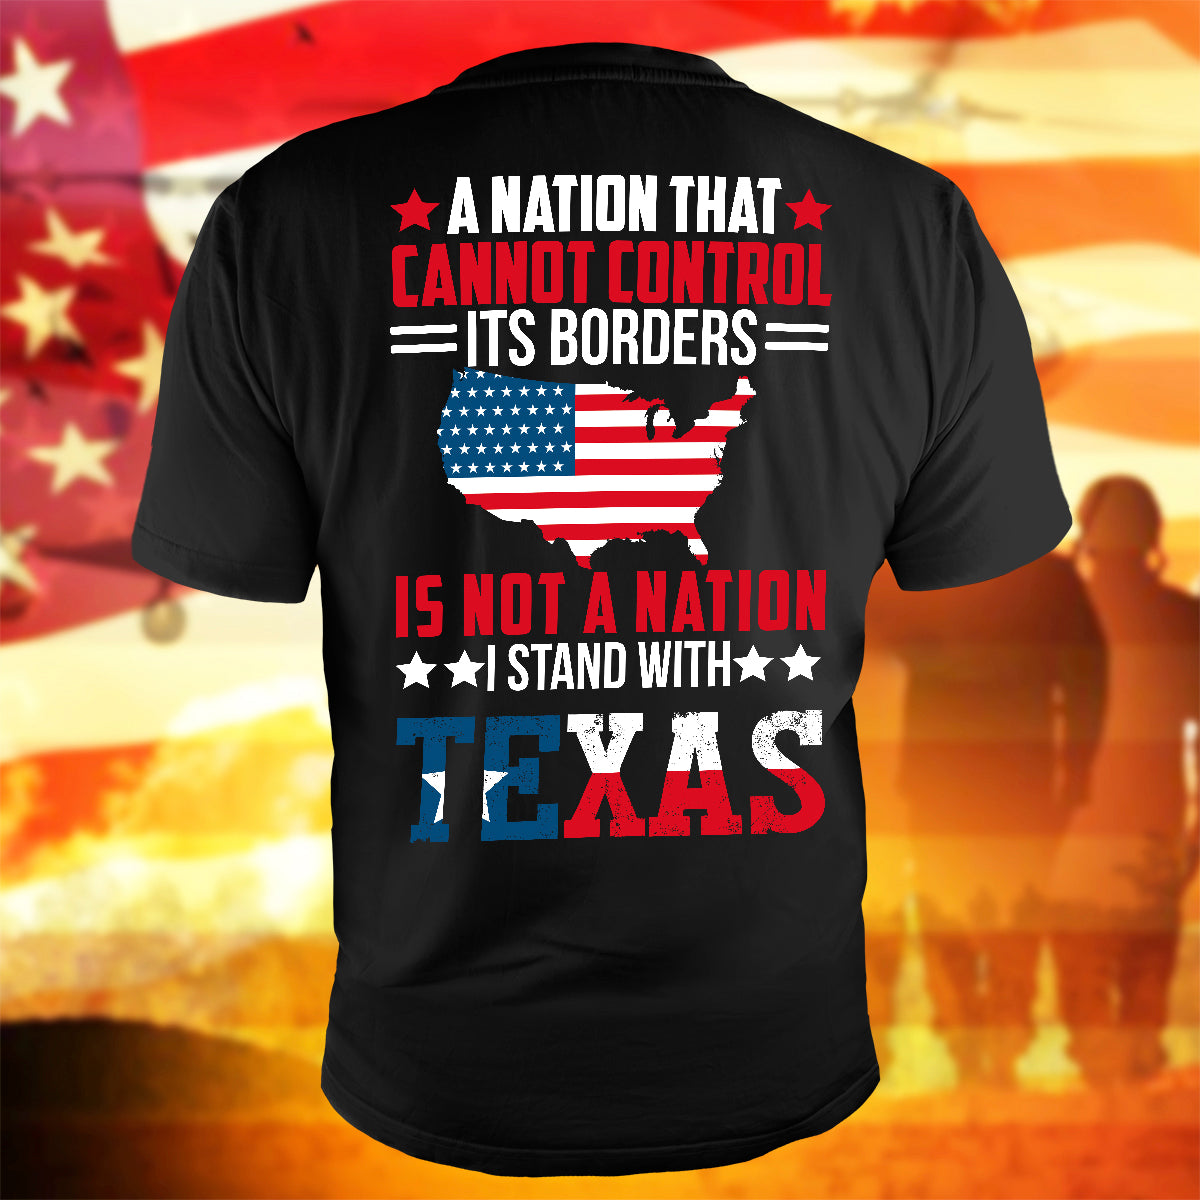 Stand With Texas T-Shirt A Nation That Cannot Control Its Borders Is Not A Nation Shirt Patriotic USA Gift